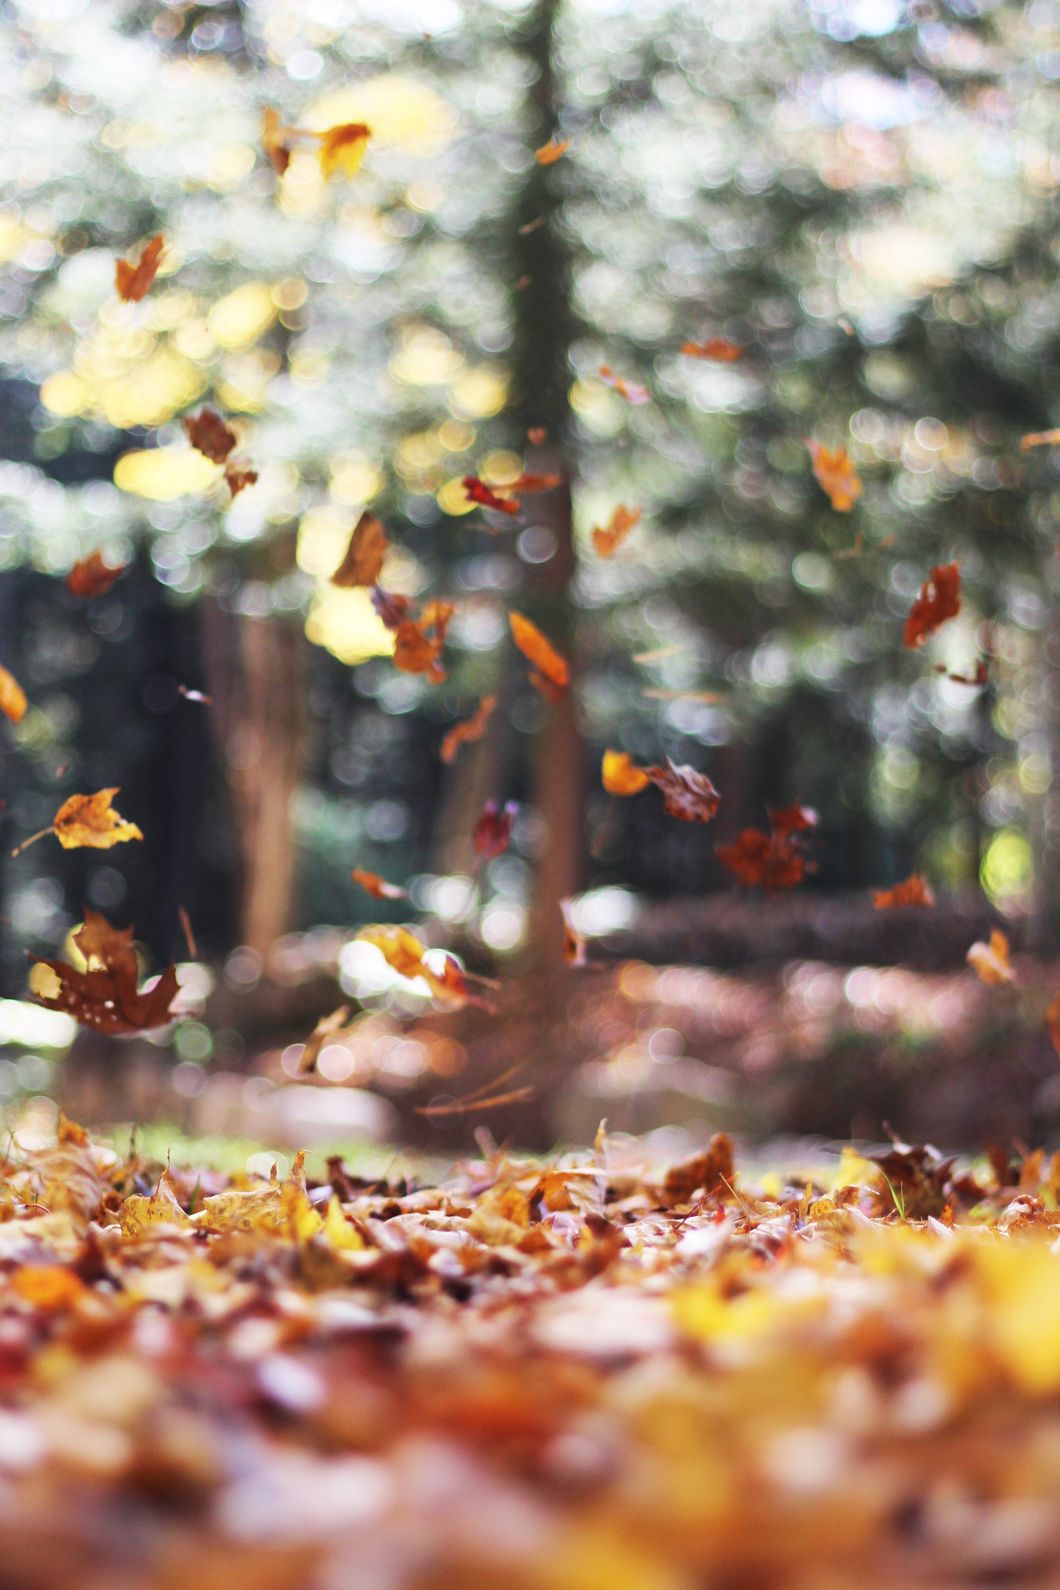 https://www.pexels.com/photo/forest-meadow-leaves-autumn-380/